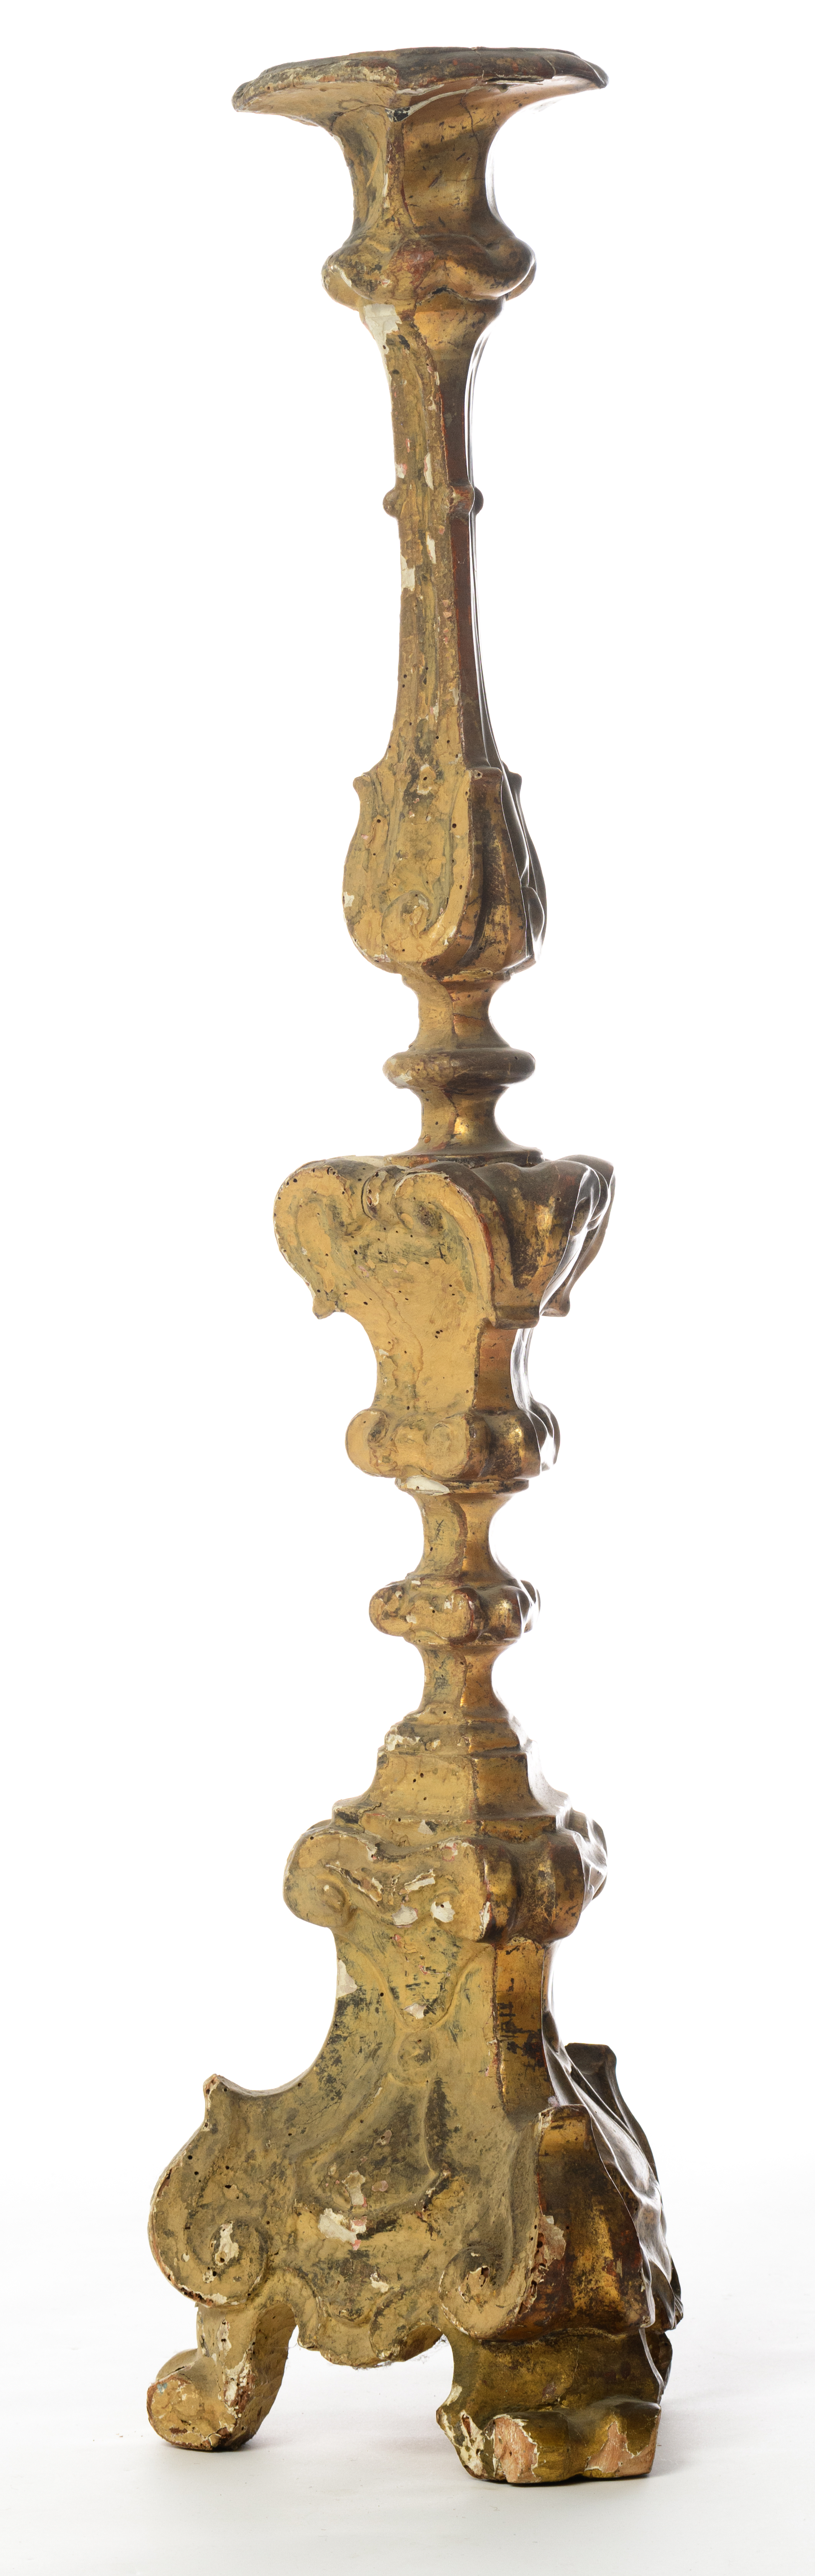 A large gilded wood Baroque altar candlestick, 18thC, H 118 cm - Image 2 of 10